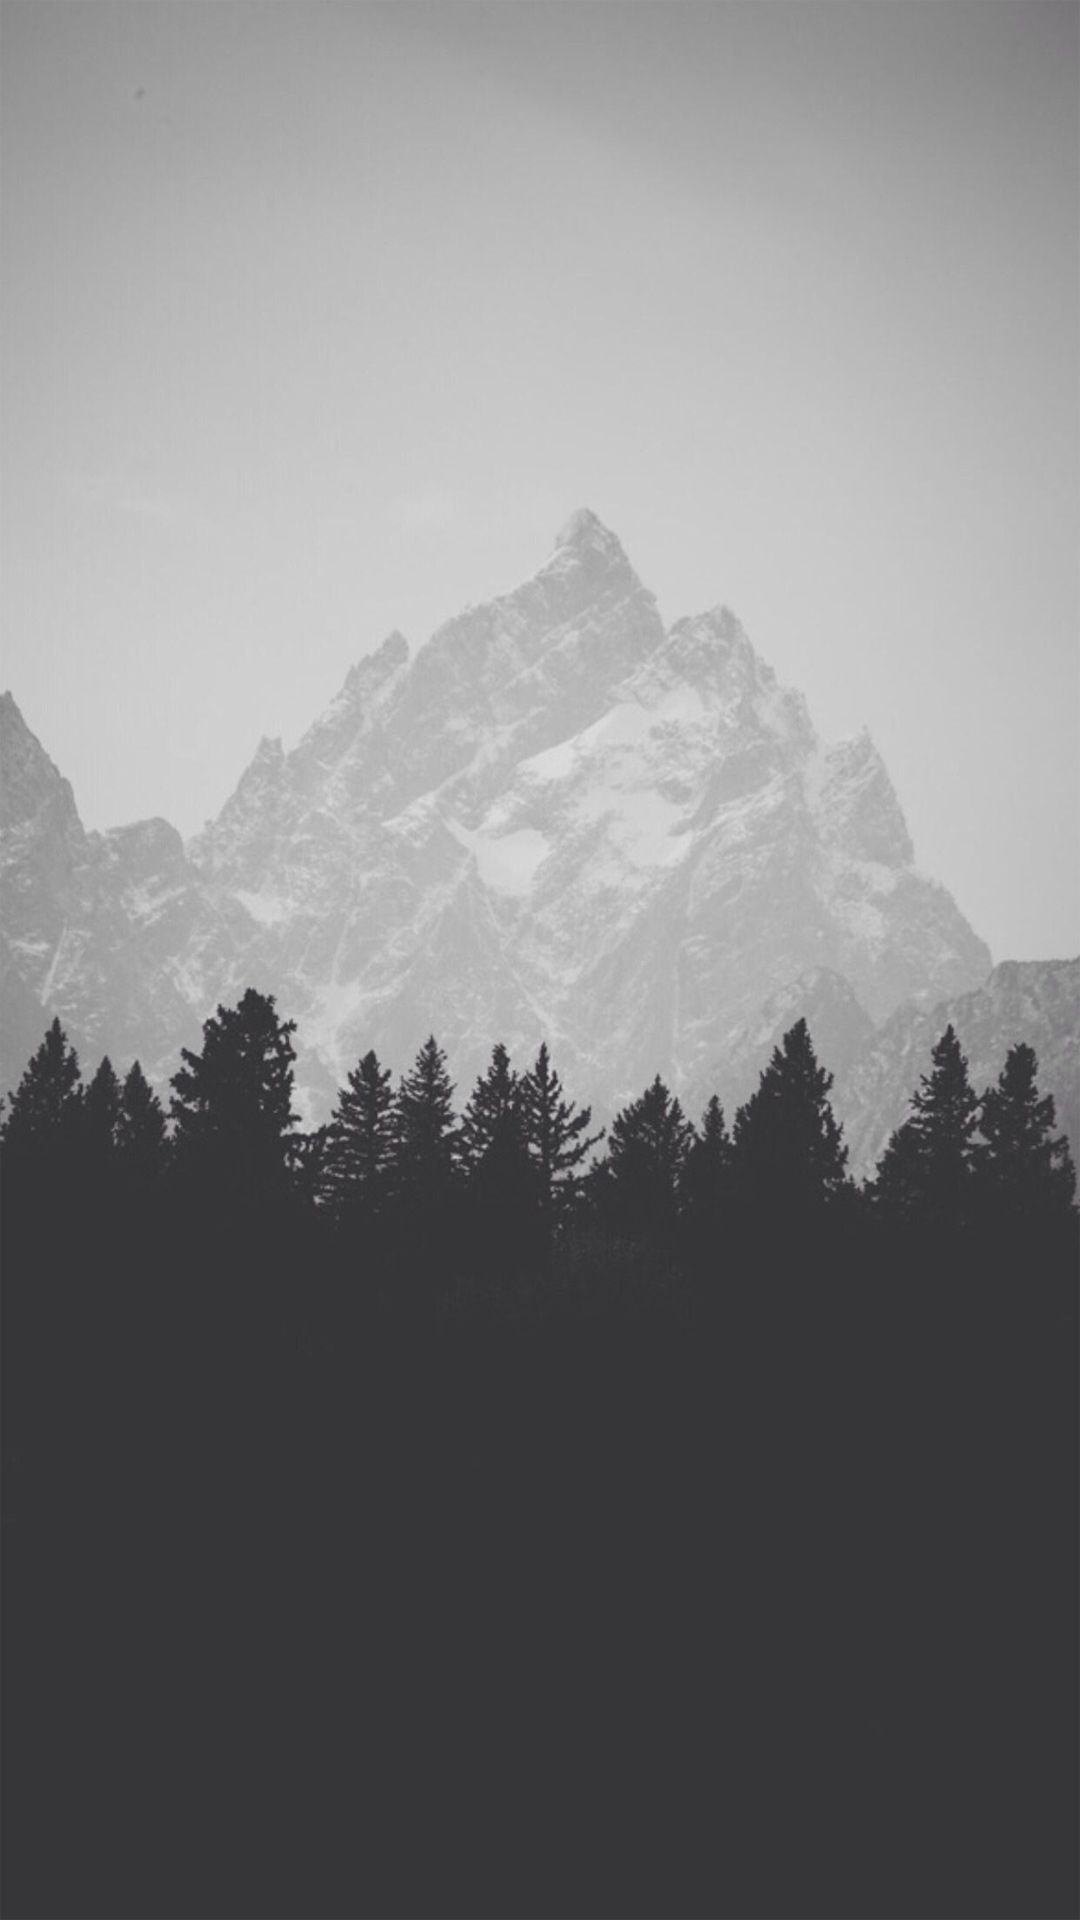 51 Stunning Black And White iPhone Wallpaper Backgrounds For Free   IdeasToKnow